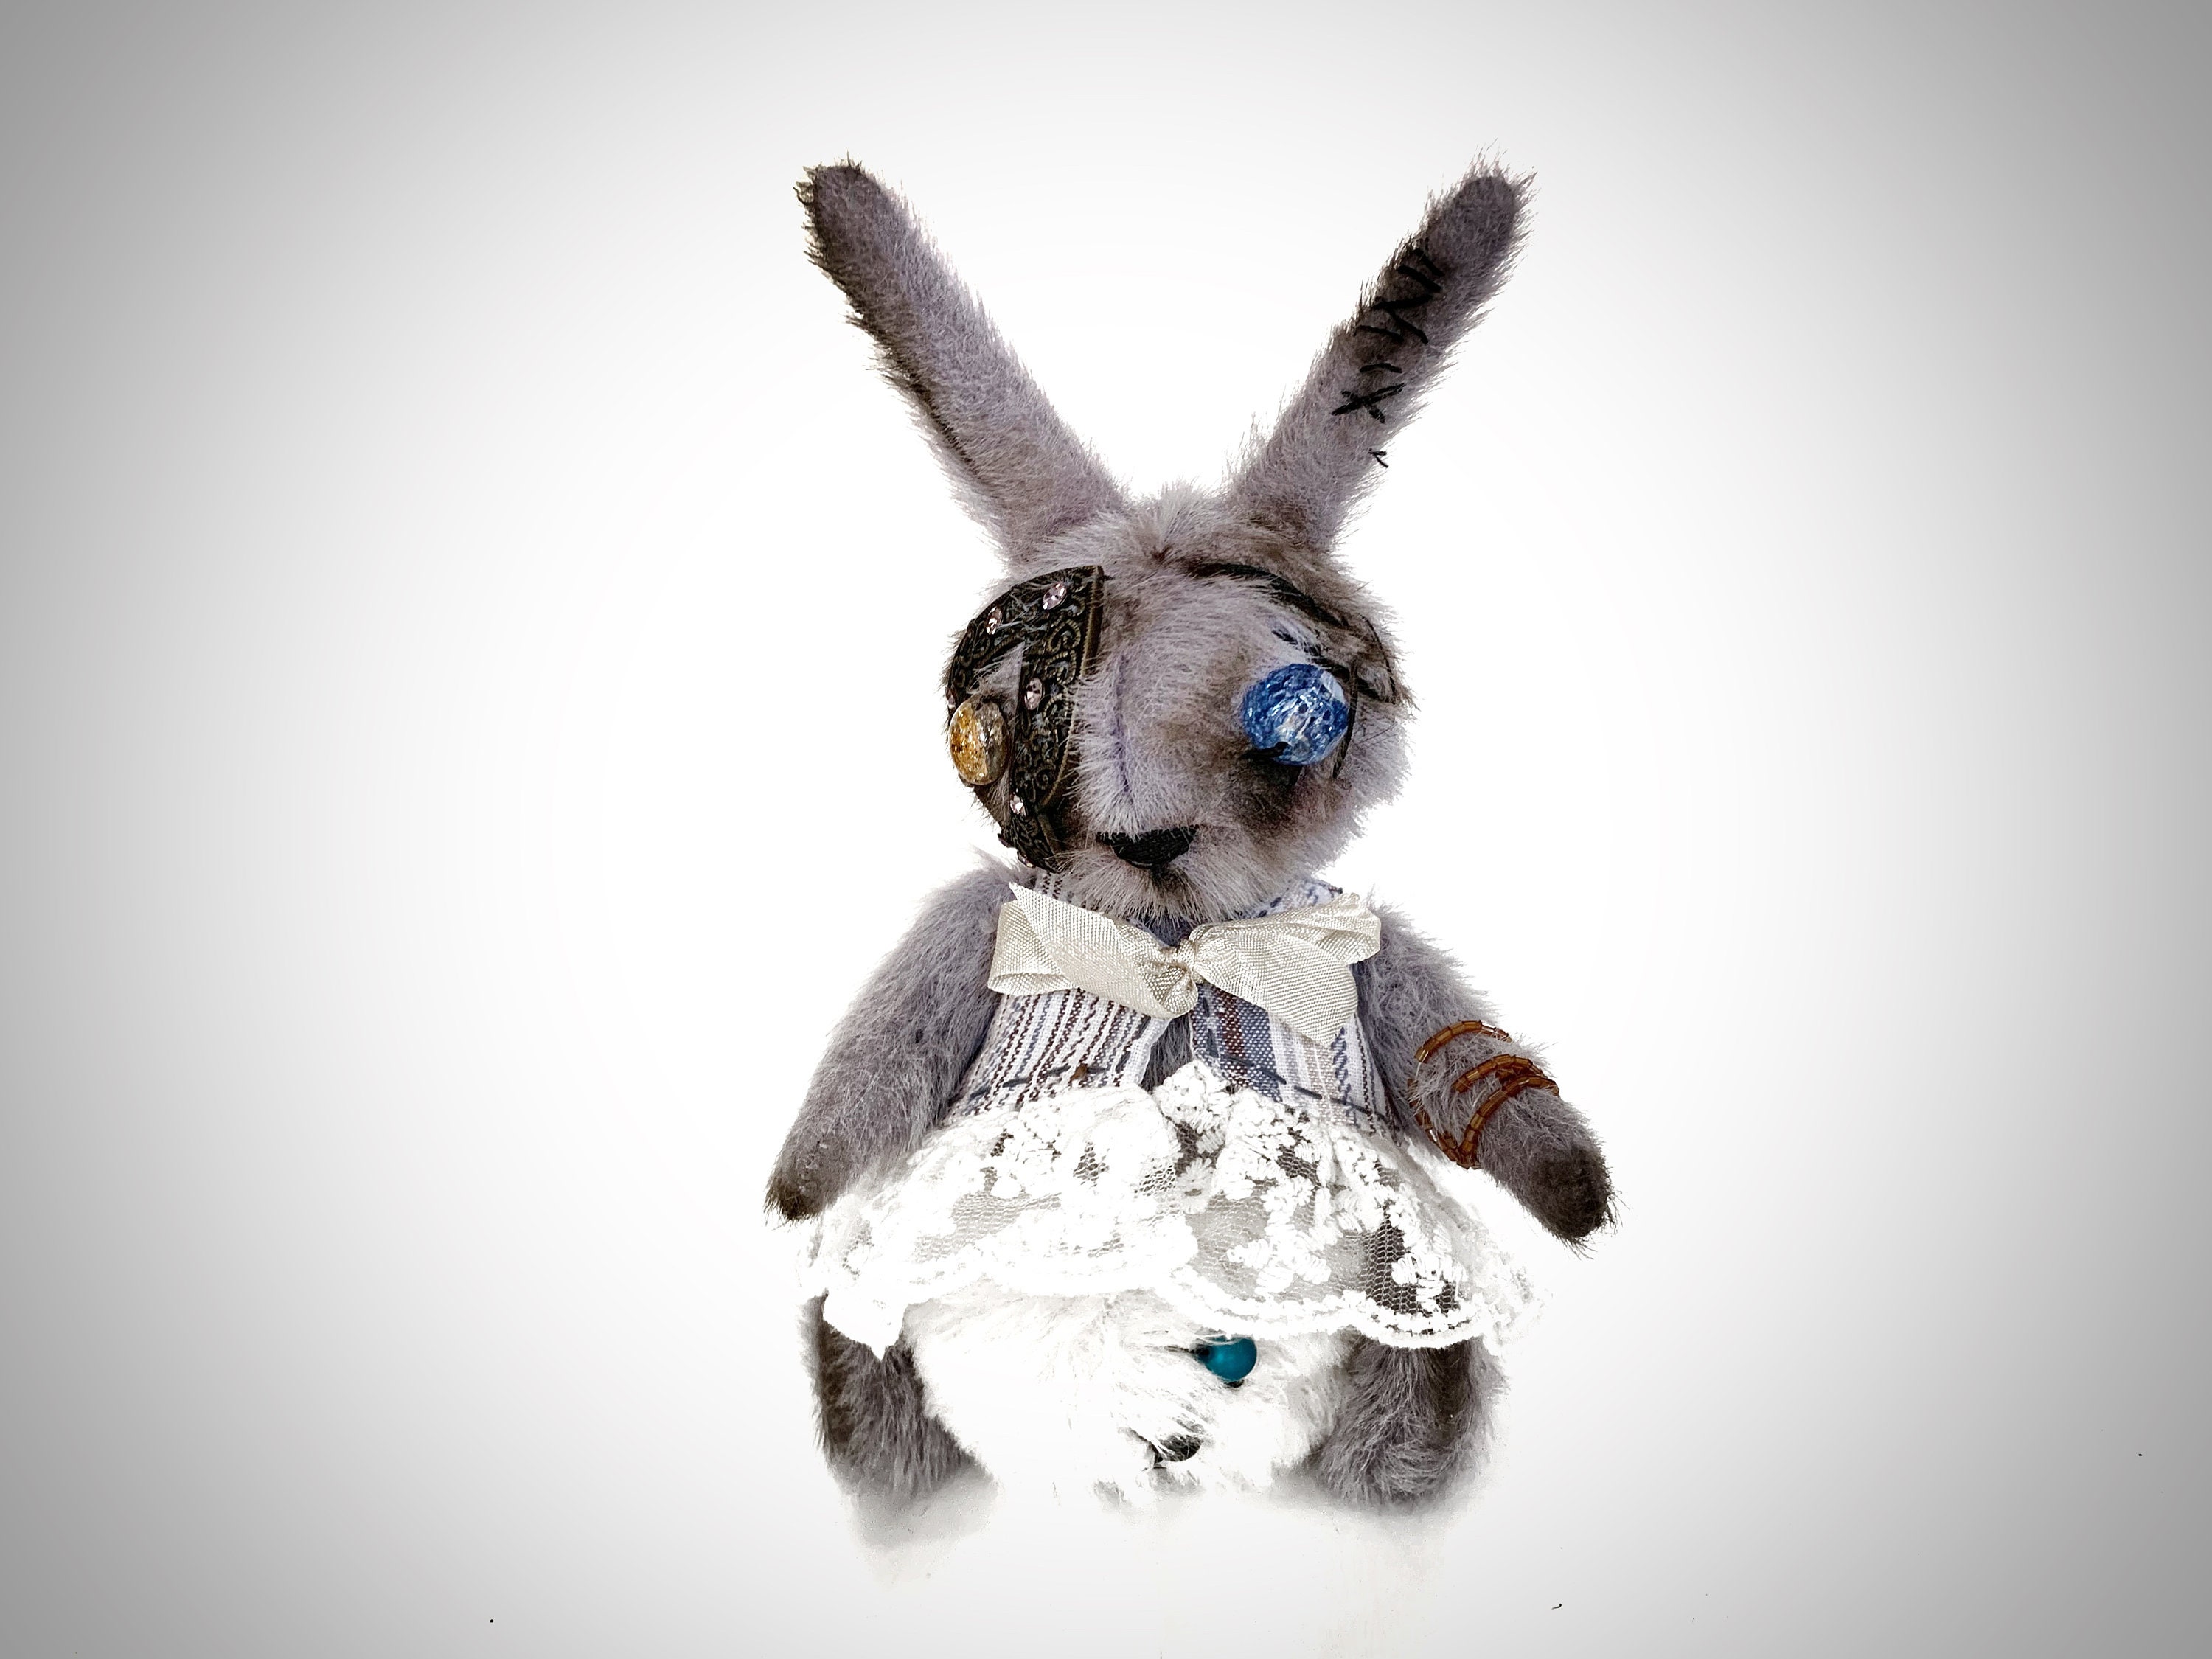 Get Your Quirky On with our Cute Gothic Rabbit Plush Toy - Perfect for Fans  of Alternative Style and Dark Aesthetics - 10 Inches of Soft, Adorable